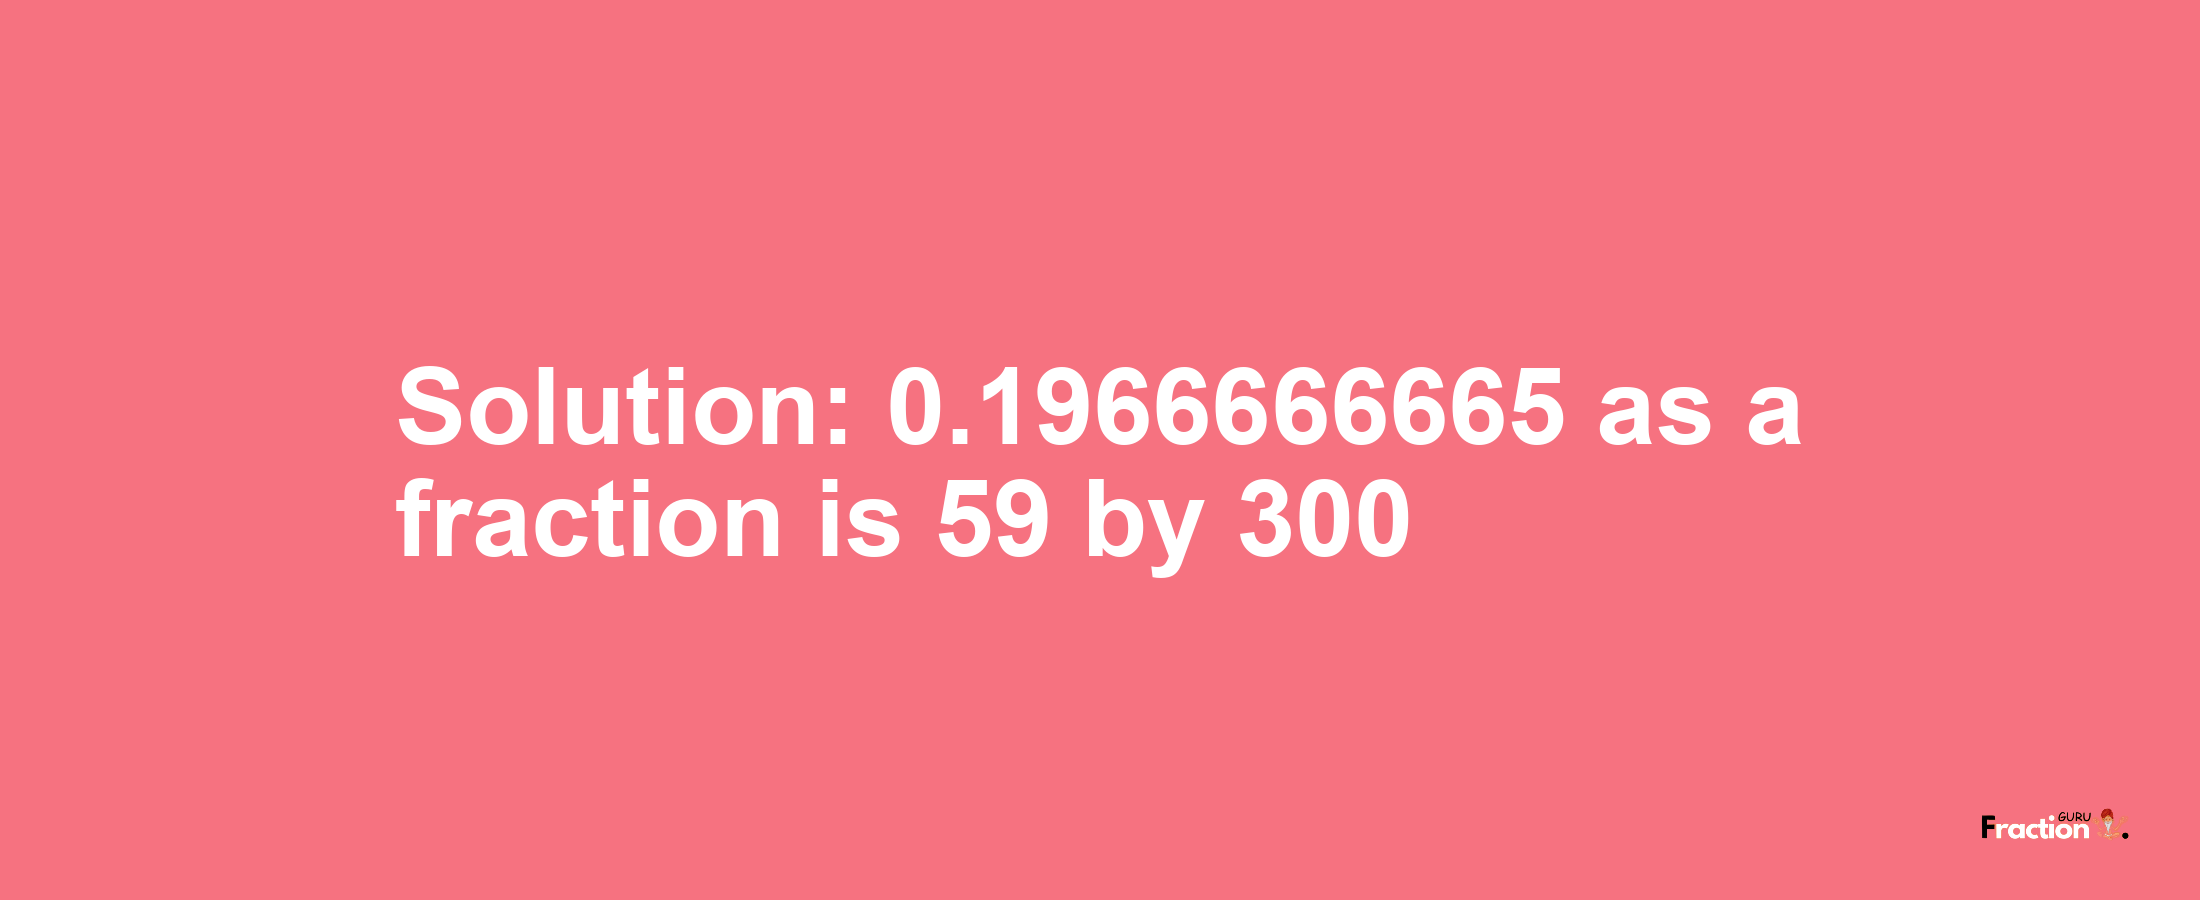 Solution:0.1966666665 as a fraction is 59/300